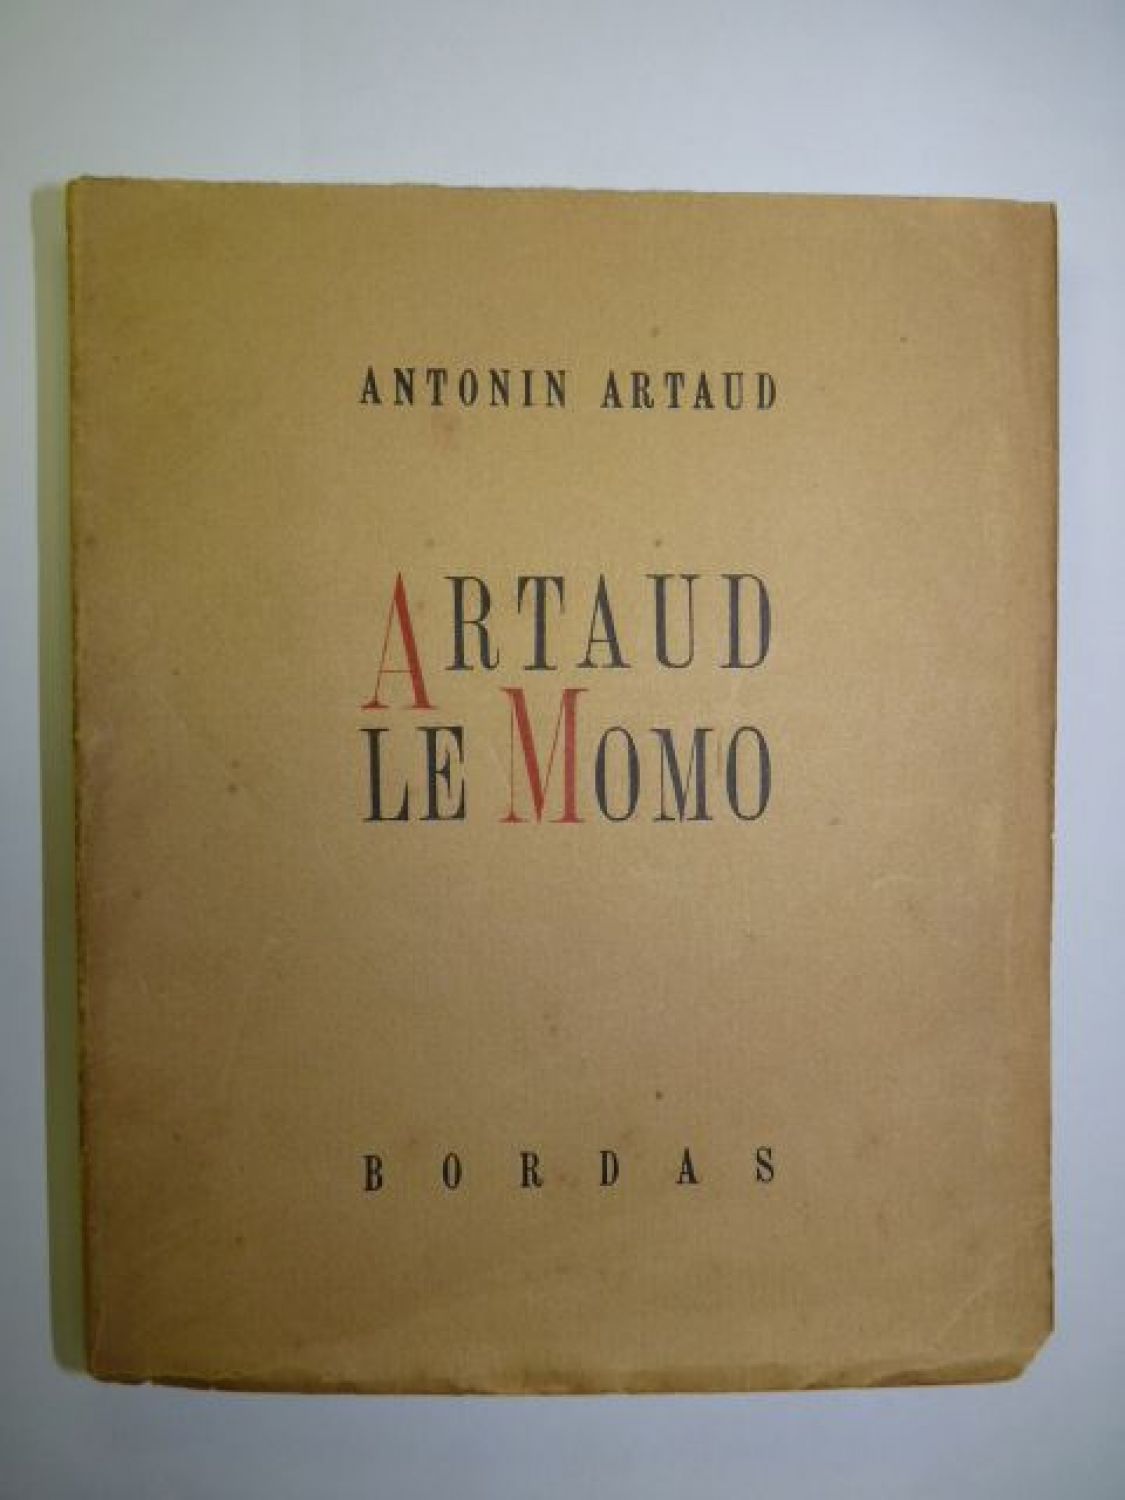 artaud the theatre and its double pdf